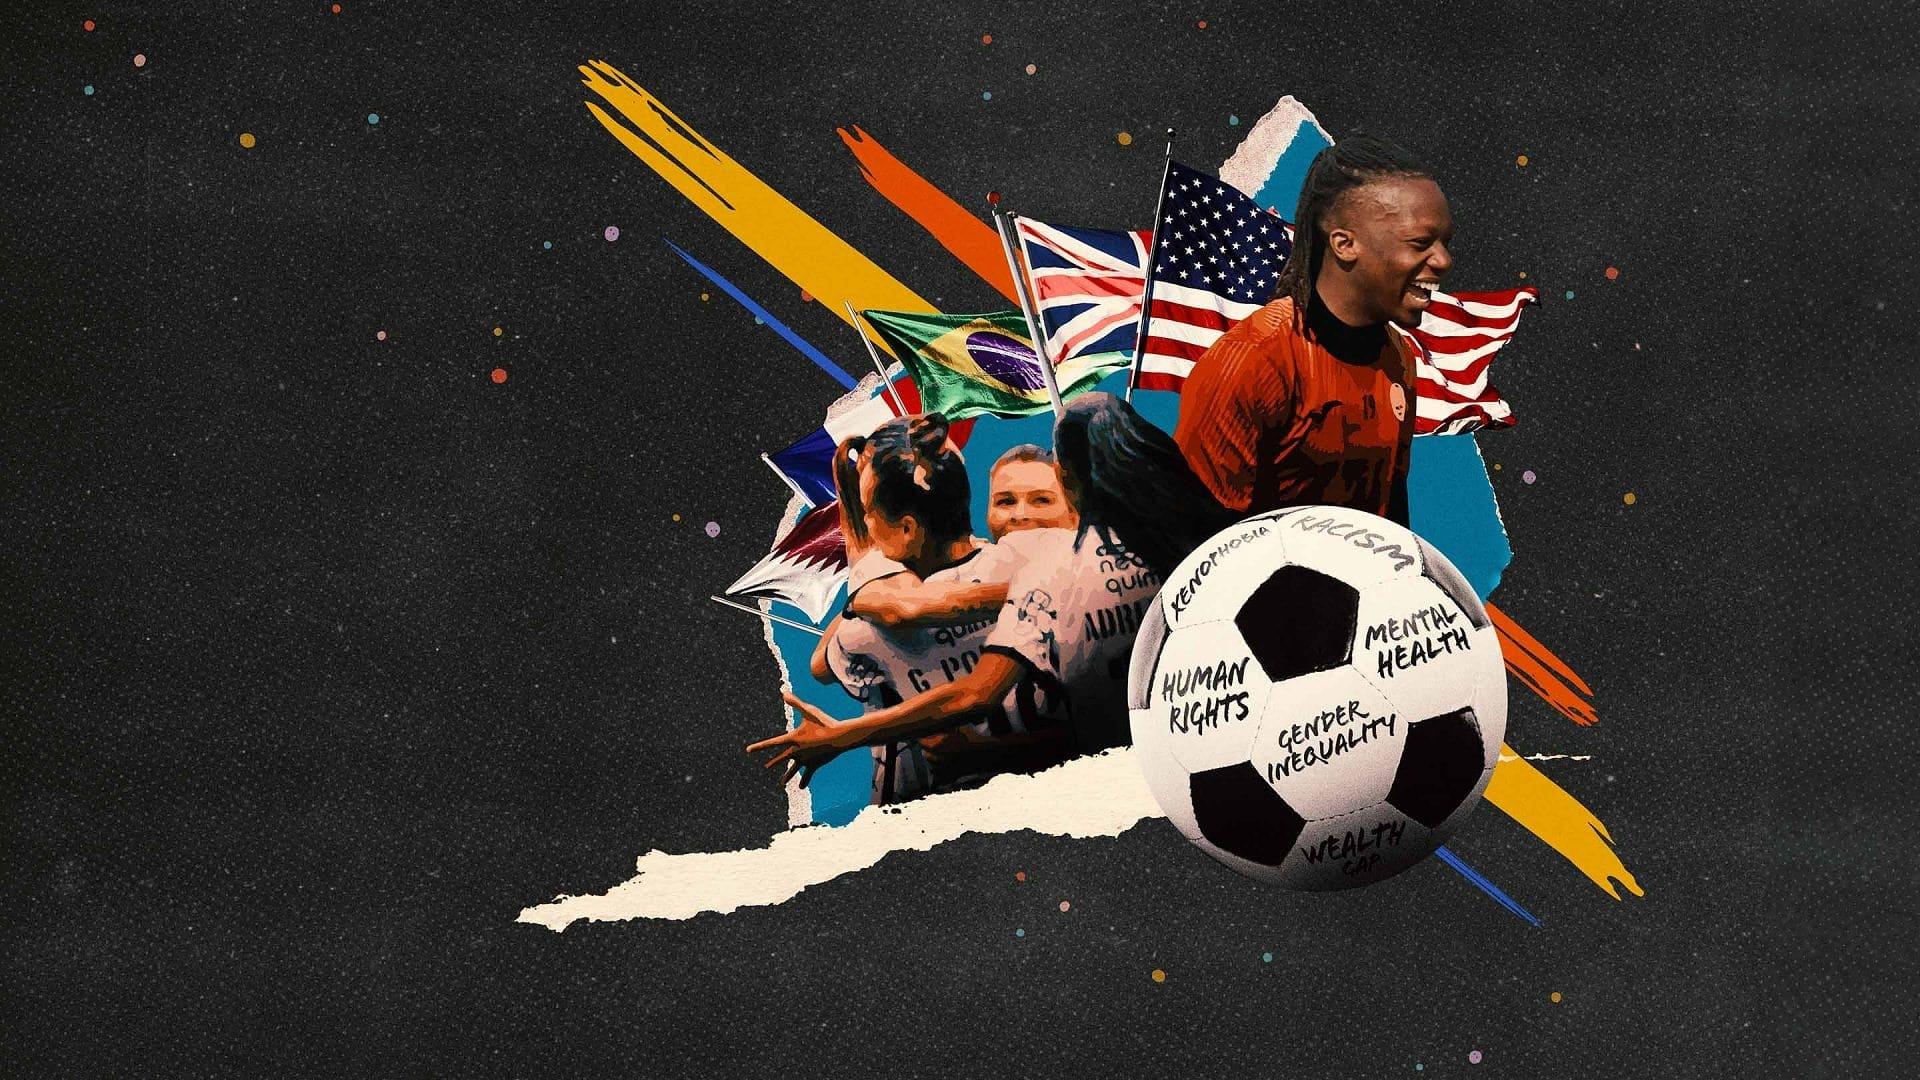 The World According to Football backdrop